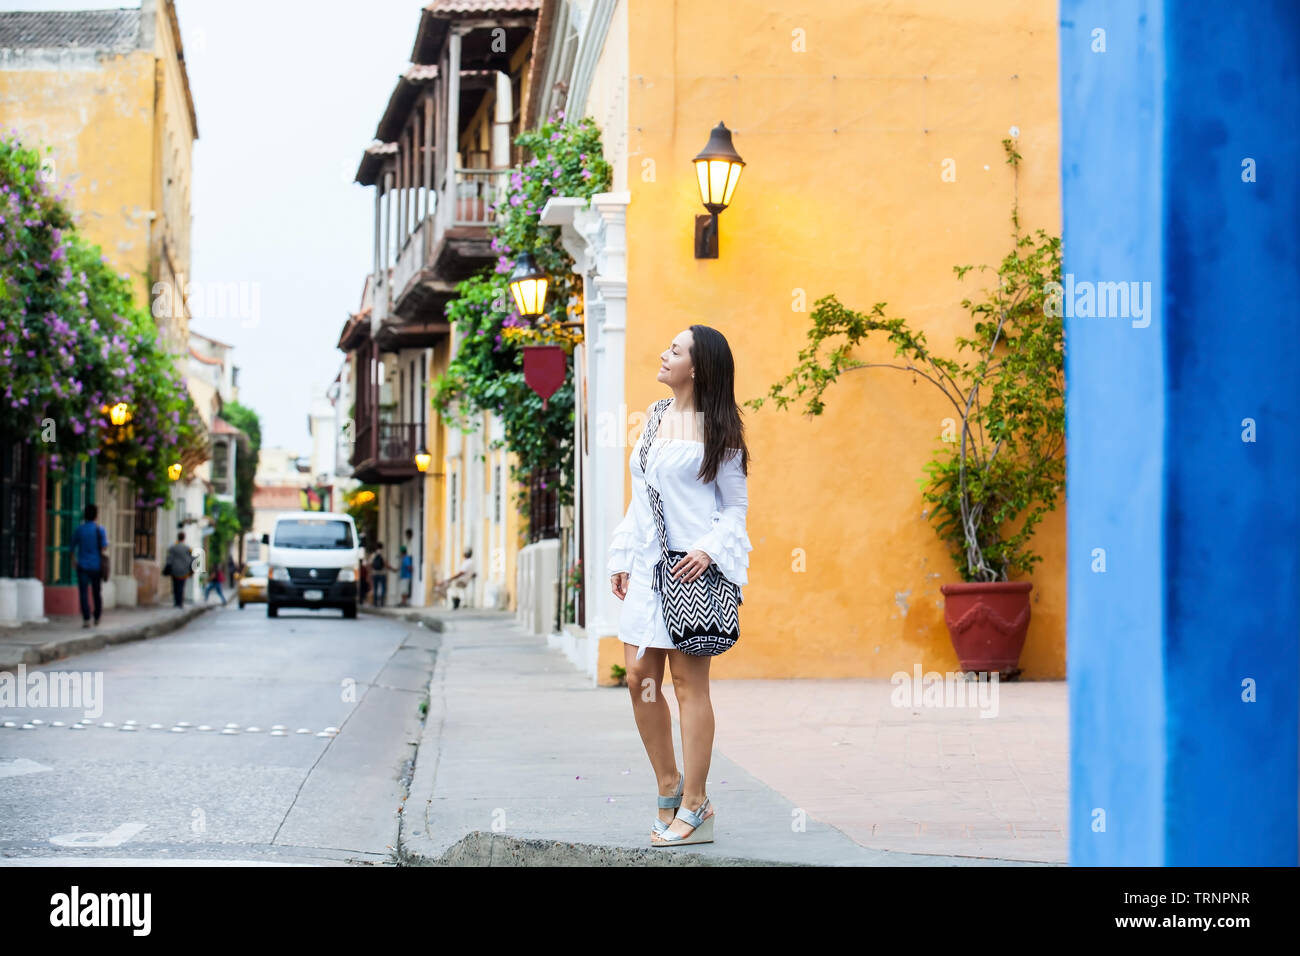 Beautiful woman on white dress walking alone at the colorful streets of the colonial walled city of Cartagena de Indias Stock Photo